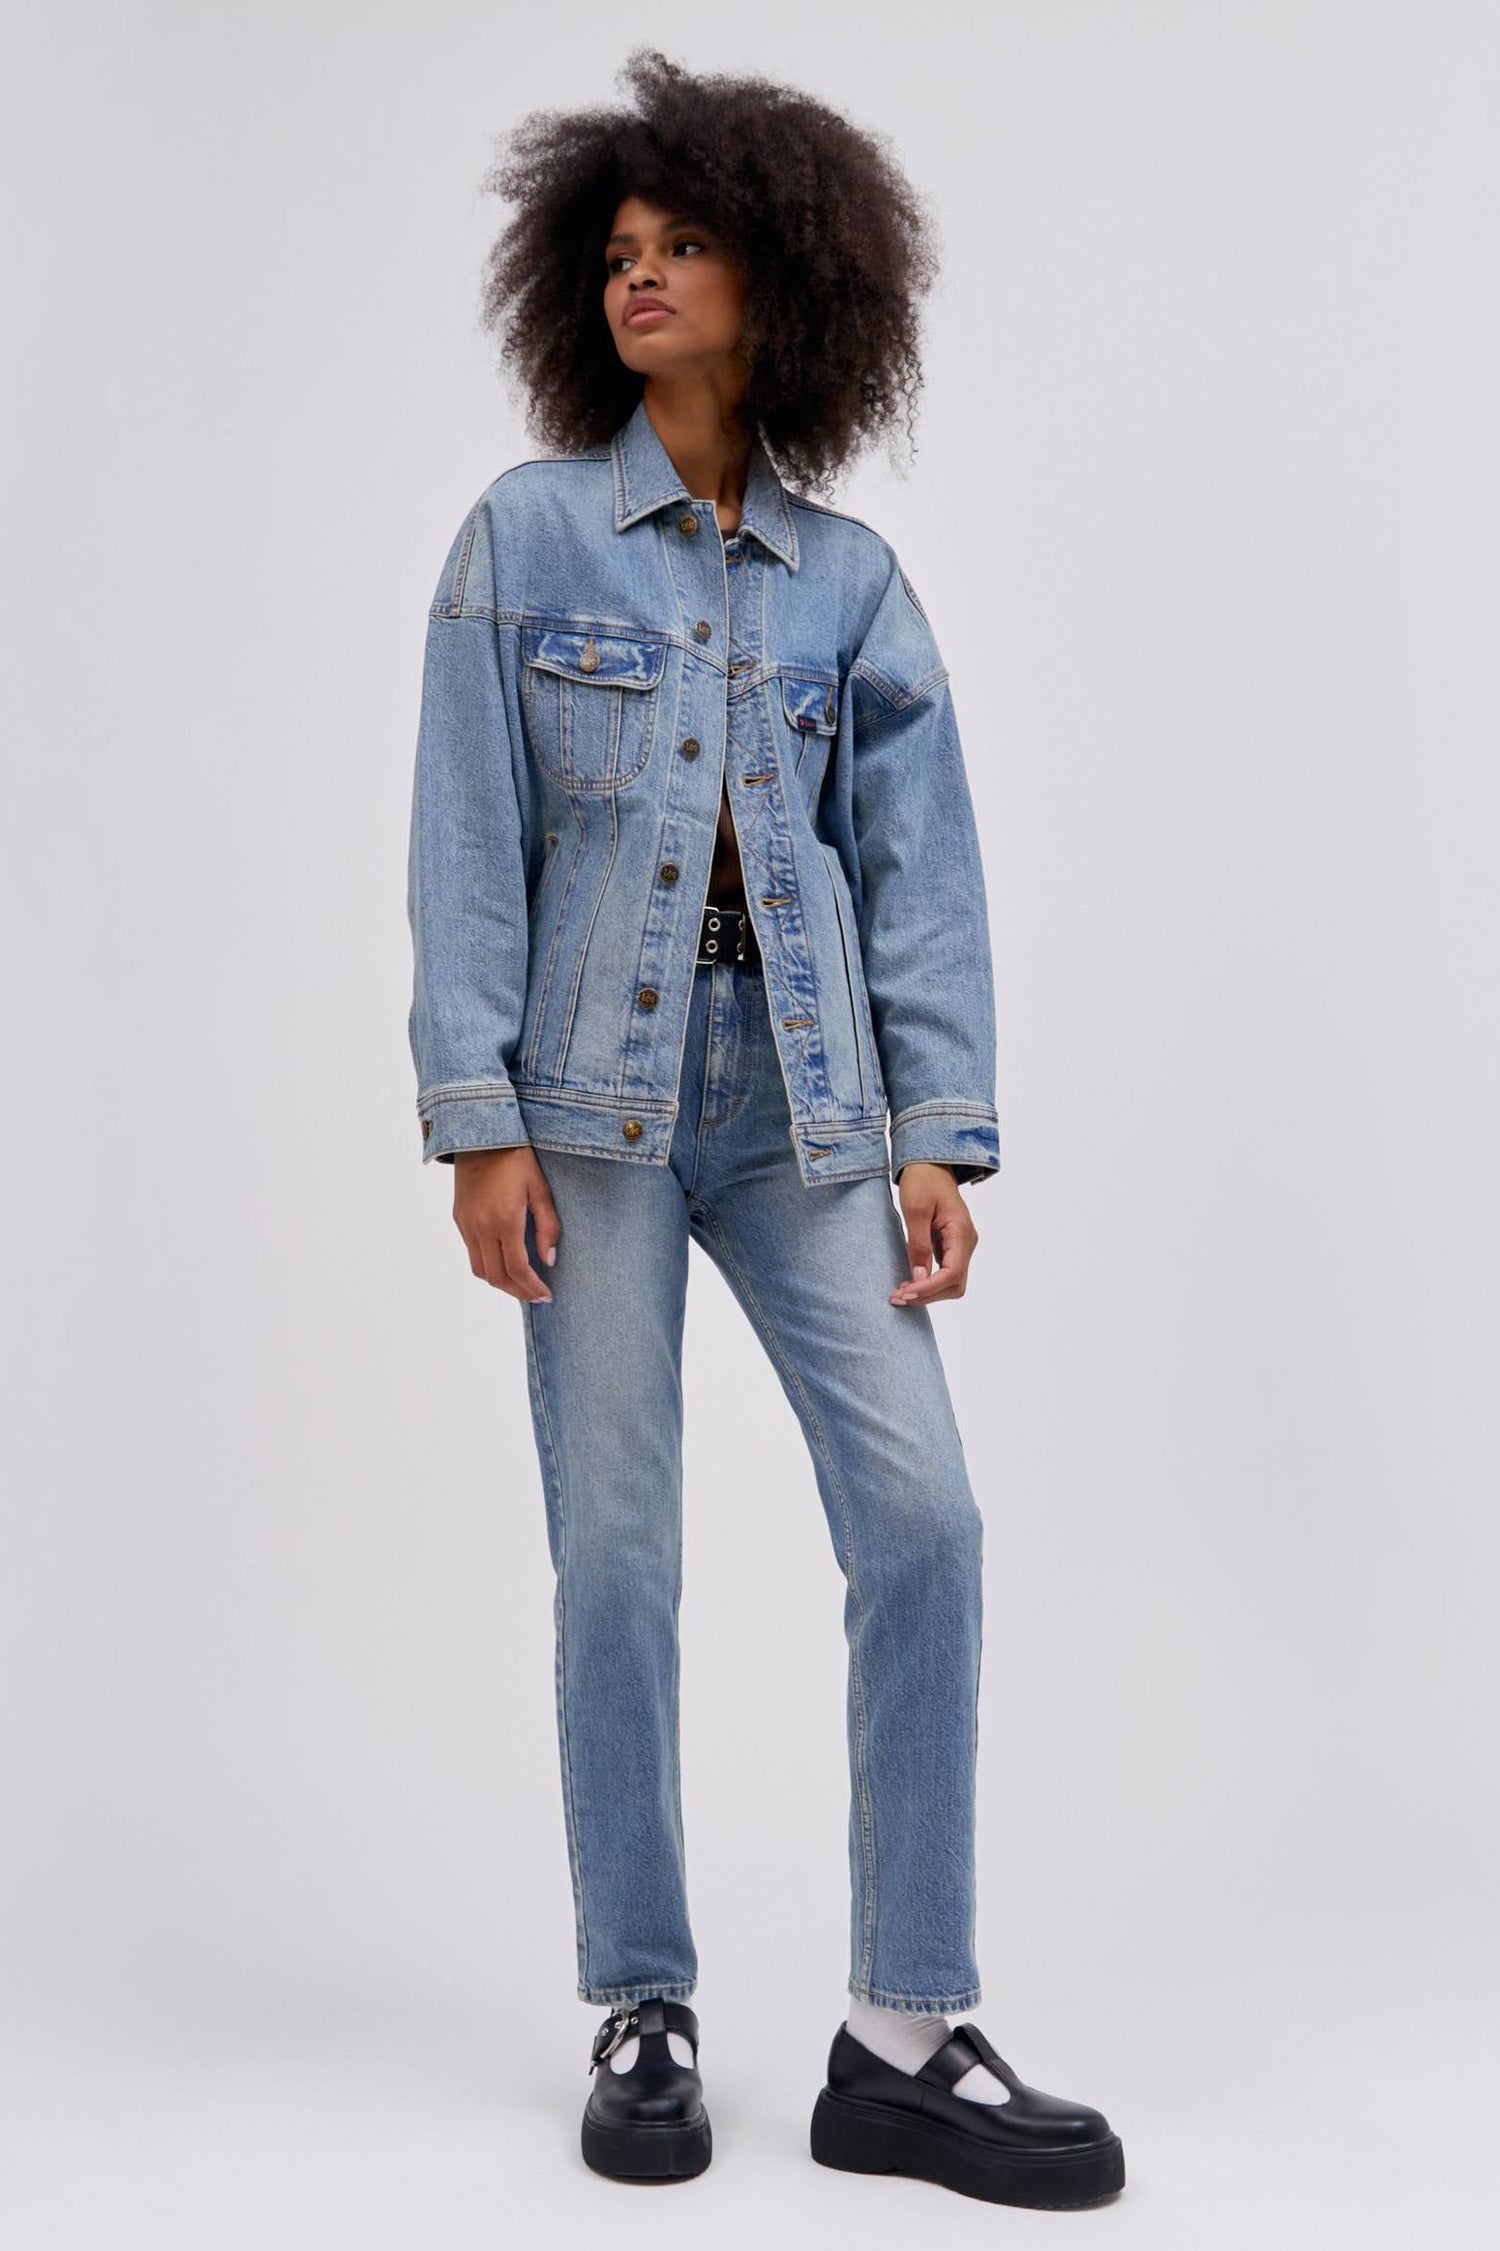 Curly haired model wearing a reimagined Lee Denim rider jacket in an oversized fit.